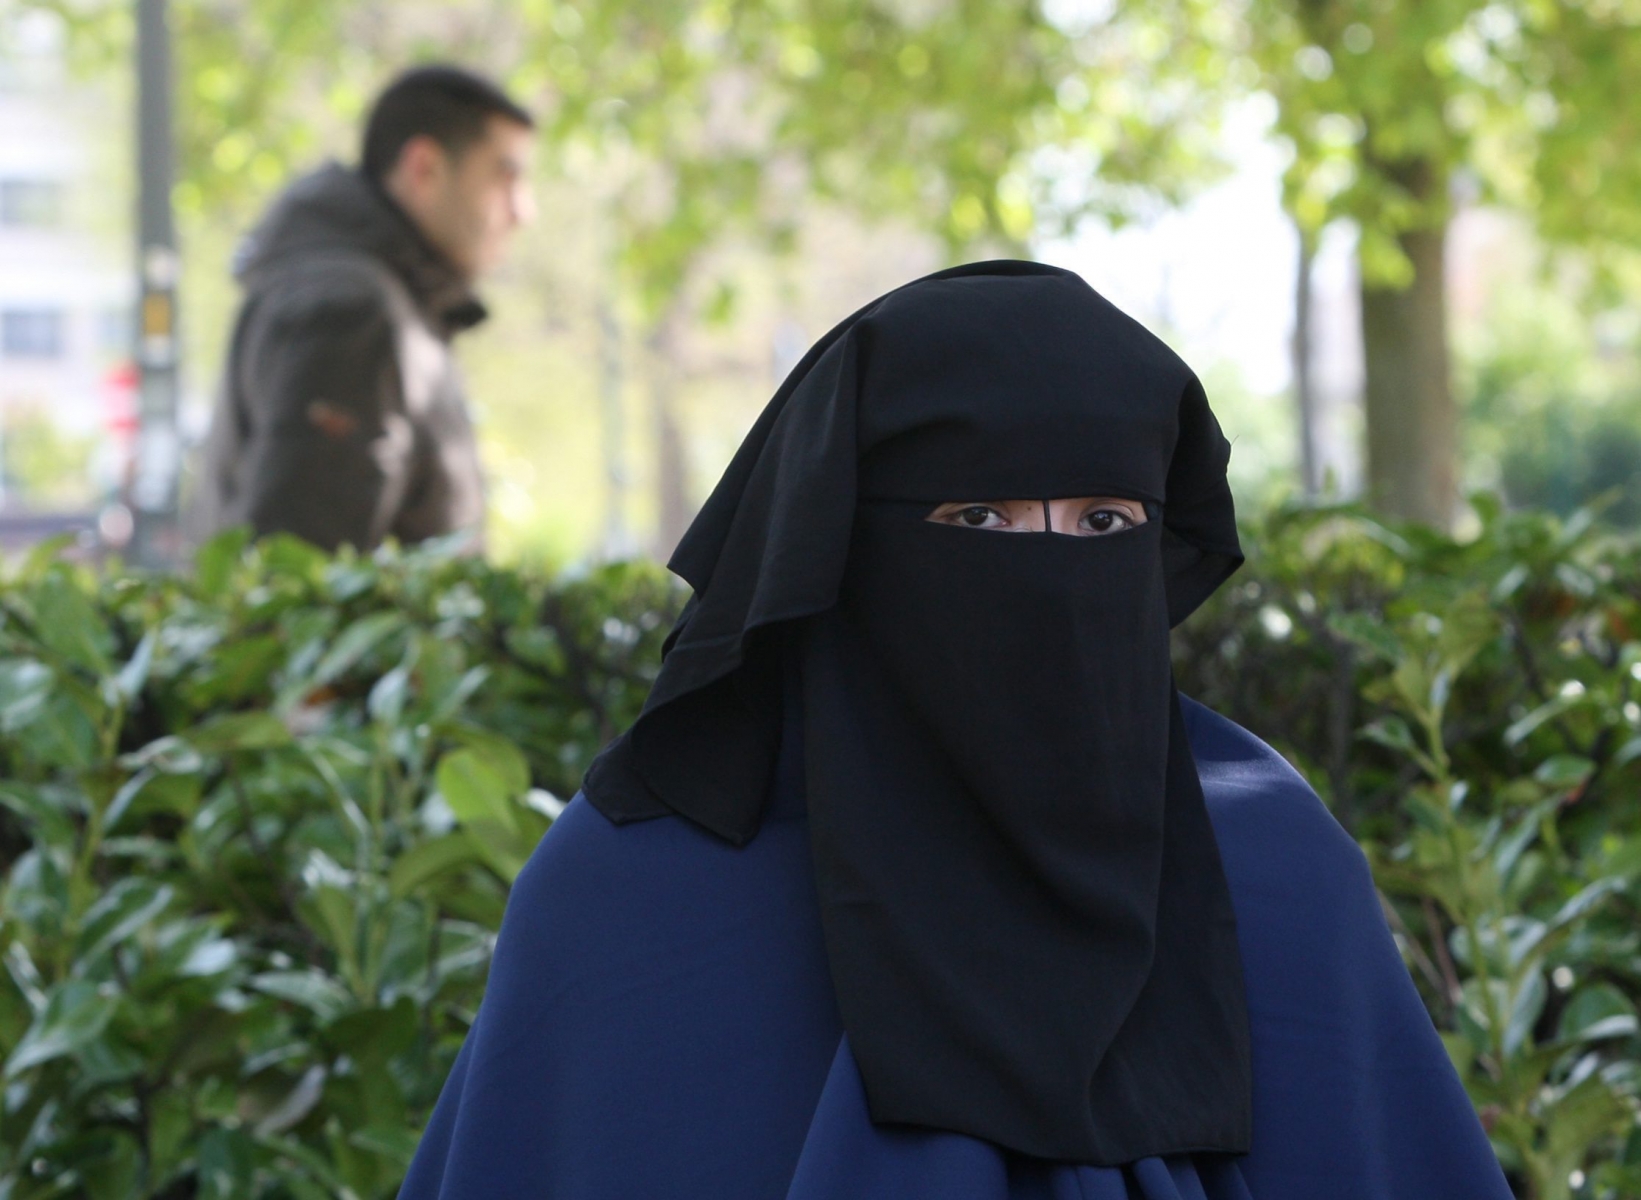 An Egyptian woman wears Islamic " Niqab" , which reveals only the eyes, walks in front of tens of soldiers securing the site of Cairo New court during the verdict of the 26 suspected Hezbollah members, accused of plotting attacks on tourists and shipping in the Suez Canal and sending operatives and explosives to Gaza to help militant groups there, in New Cairo, Egypt, Wednesday, April 28, 2010 . An Egyptian judge has sentenced three suspected Hezbollah members accused of plotting attacks on tourists, including its main Shiite leader, with life in prison. The rest of the suspects received sentences ranging from 15 years to six months. (AP Photo/Amr Nabil)       Mideast Egypt Hezbollah